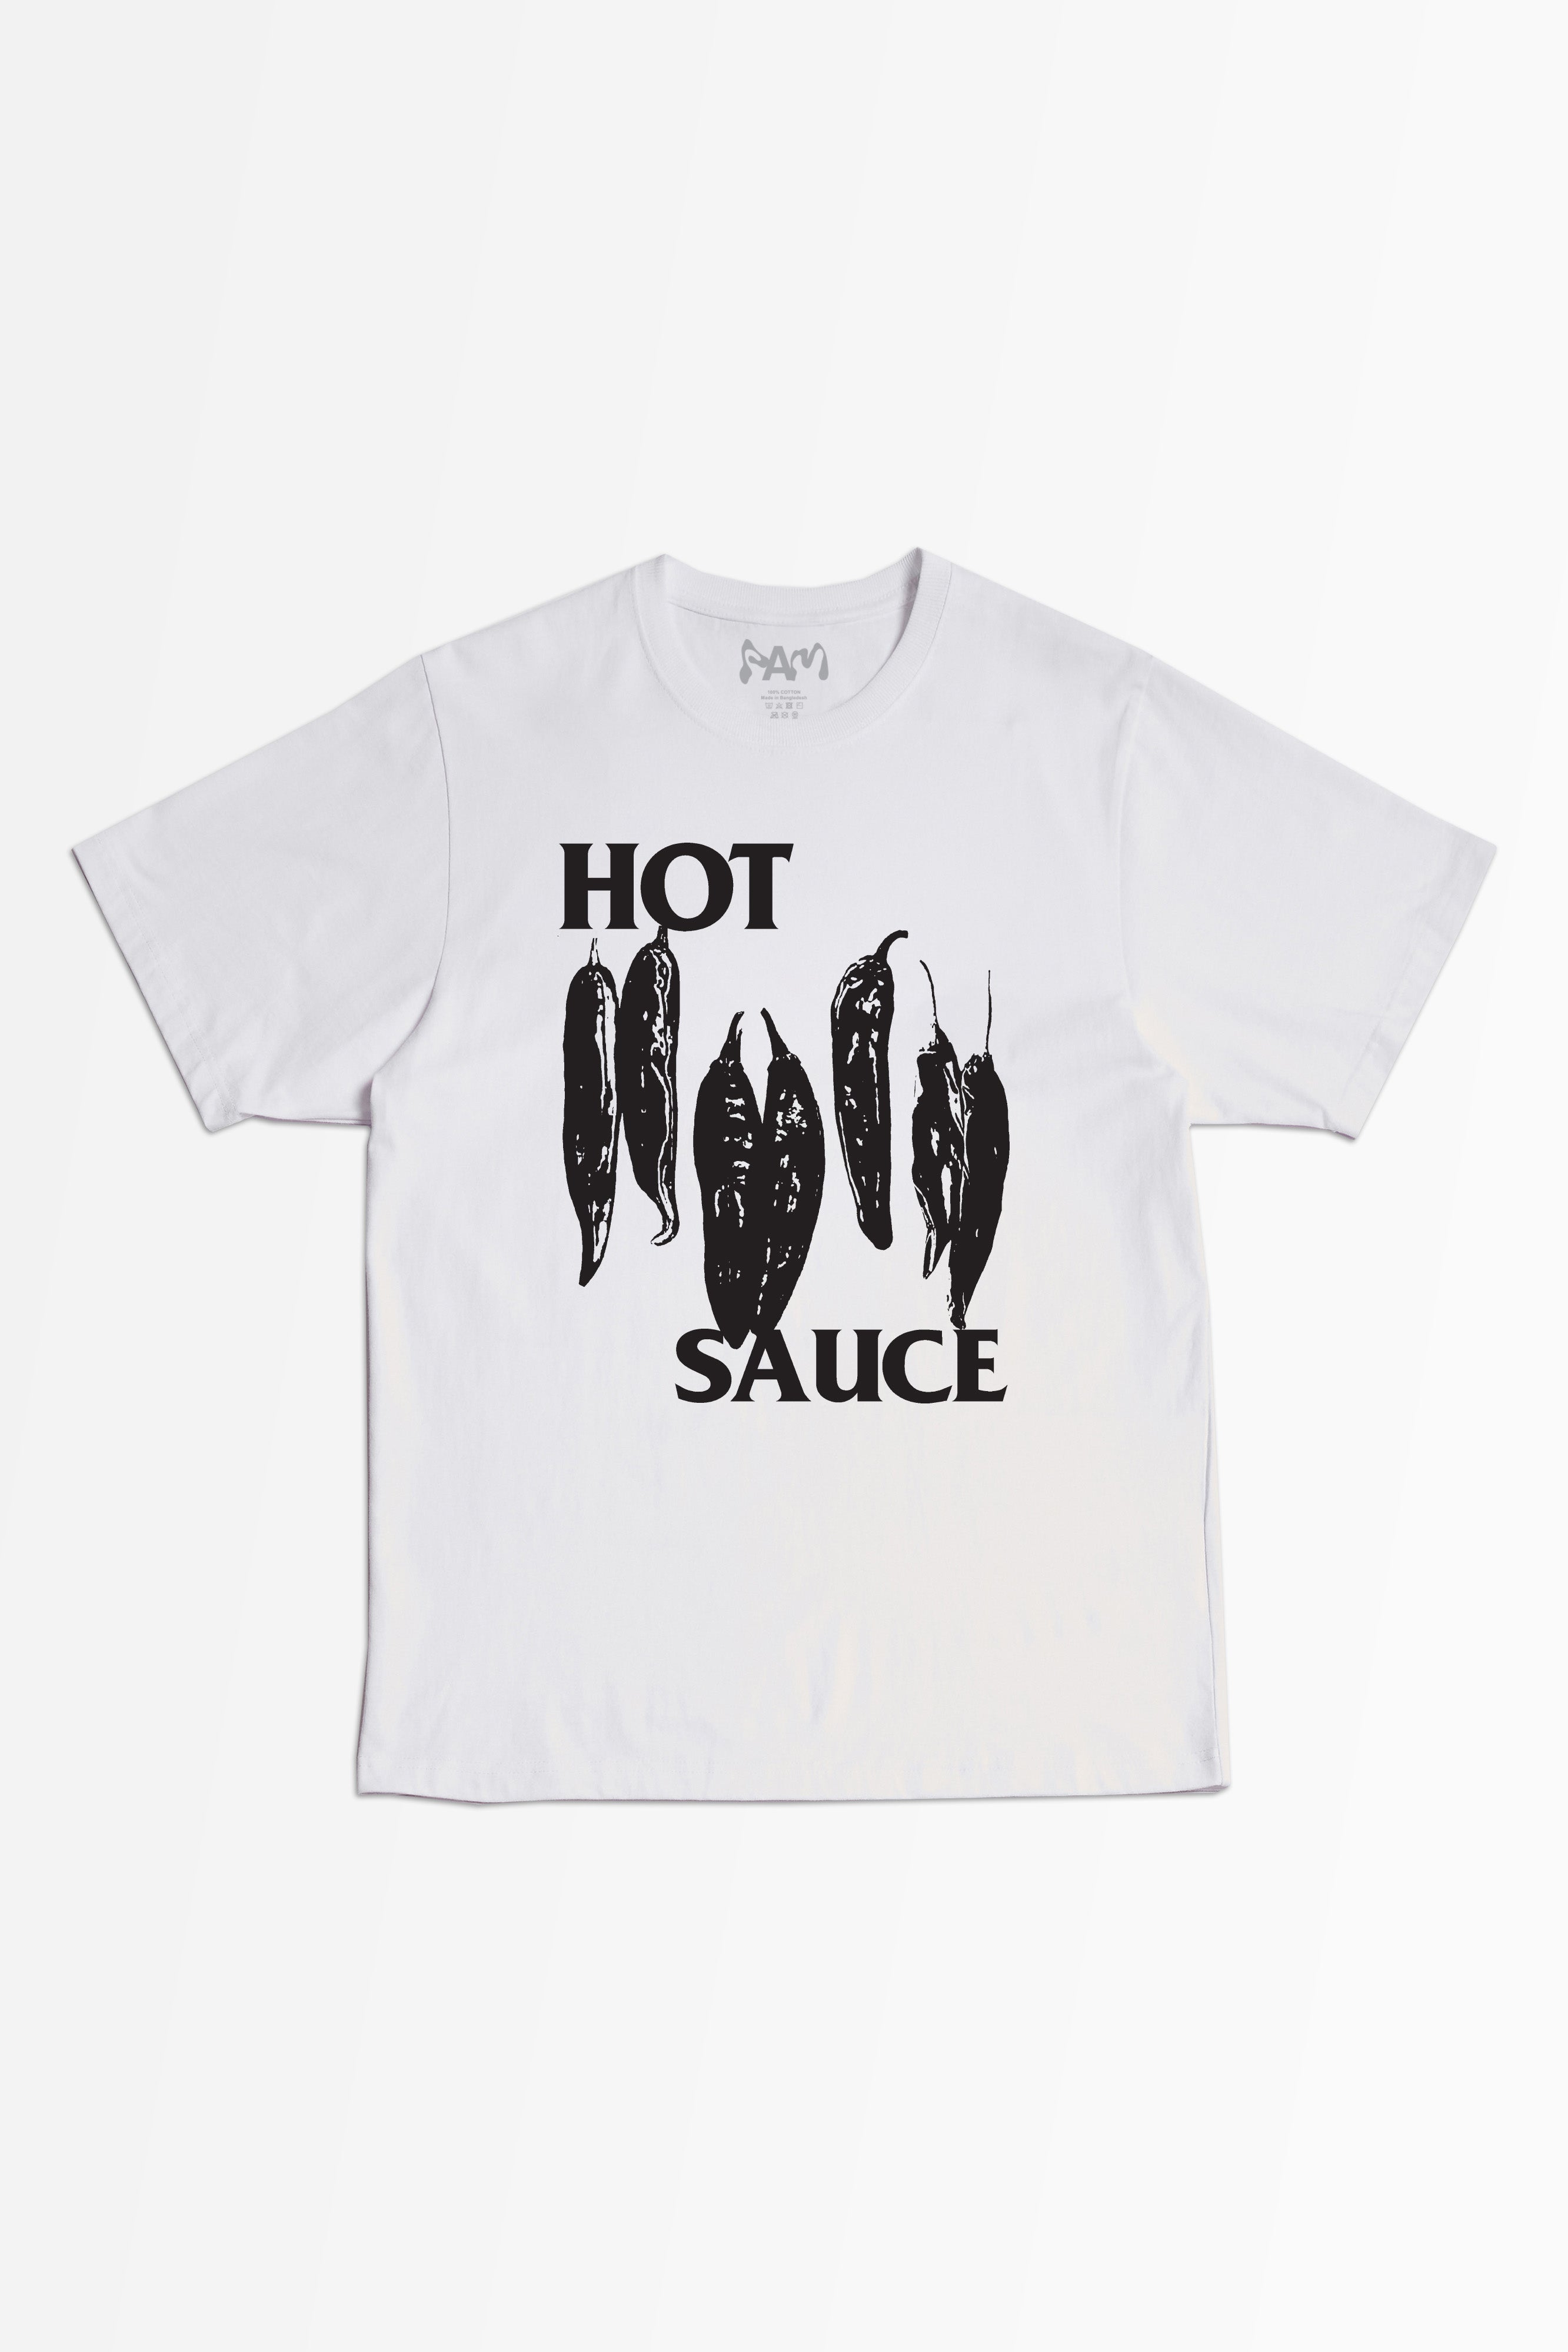 The P.A.M. x ROUGH RICE - HOT SAUCE TEE  available online with global shipping, and in PAM Stores Melbourne and Sydney.